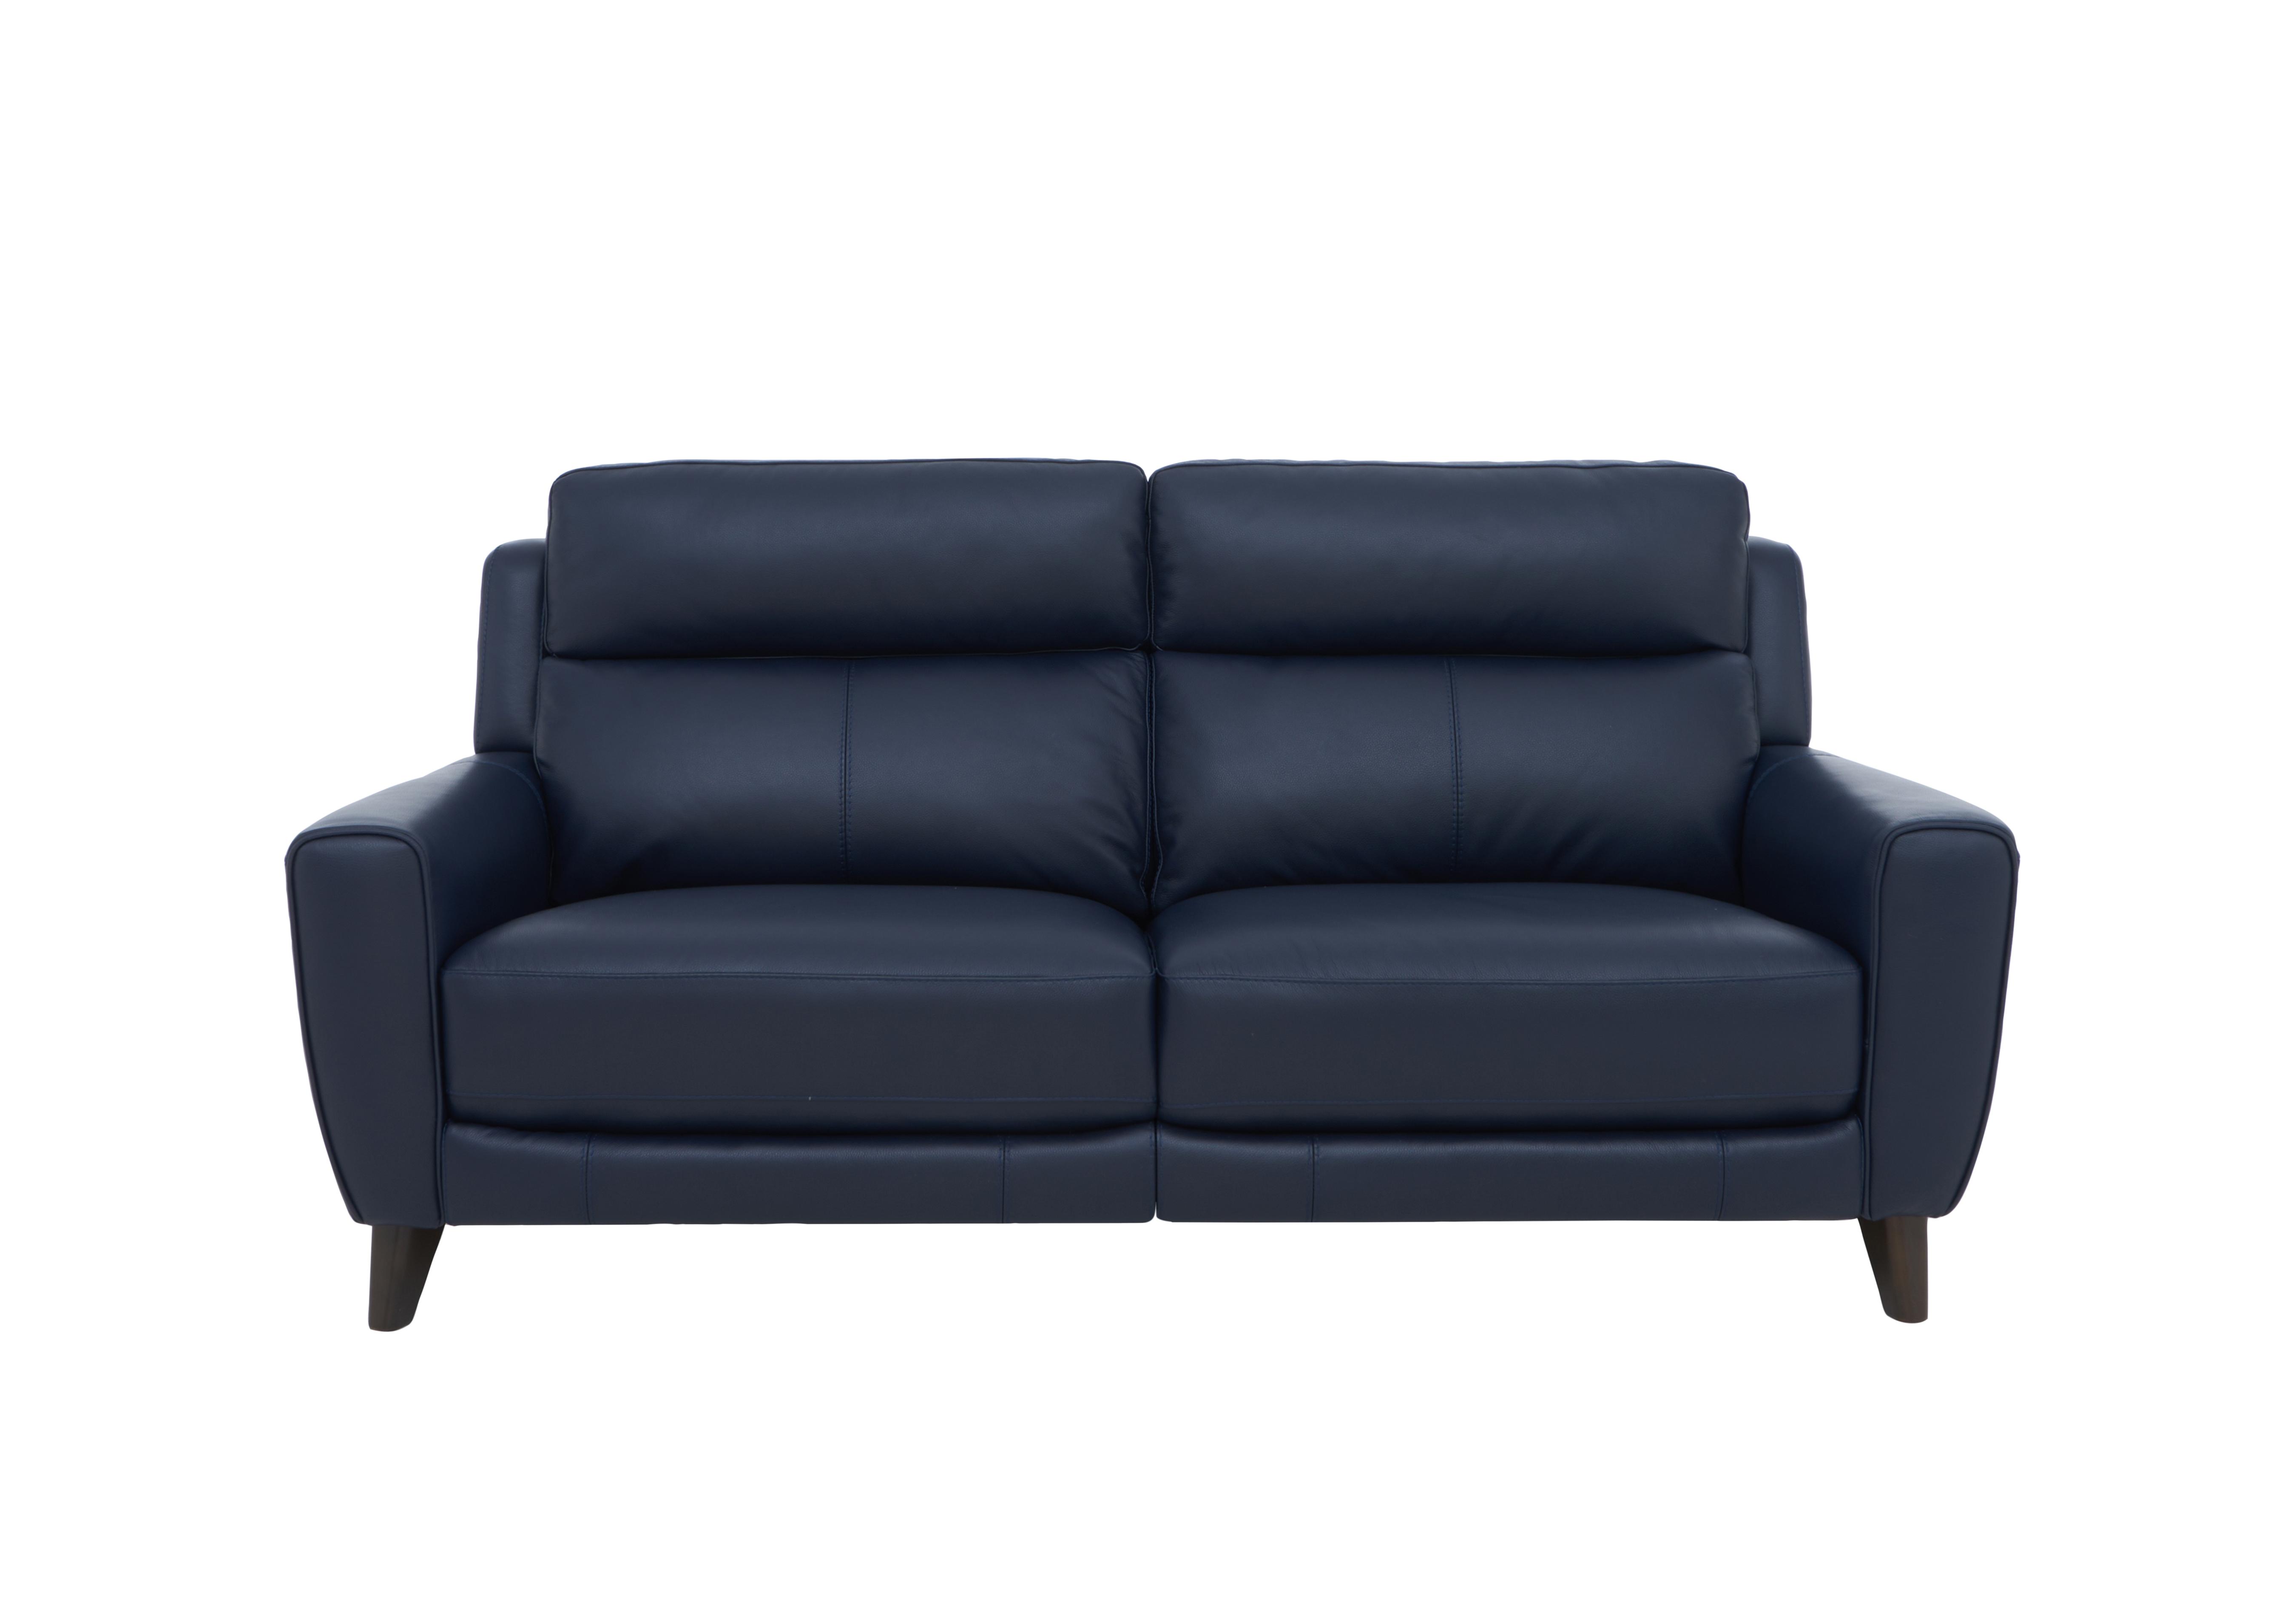 Zen 3 Seater Leather Power Recliner Sofa with Power Headrests in Bx-036c Navy on Furniture Village